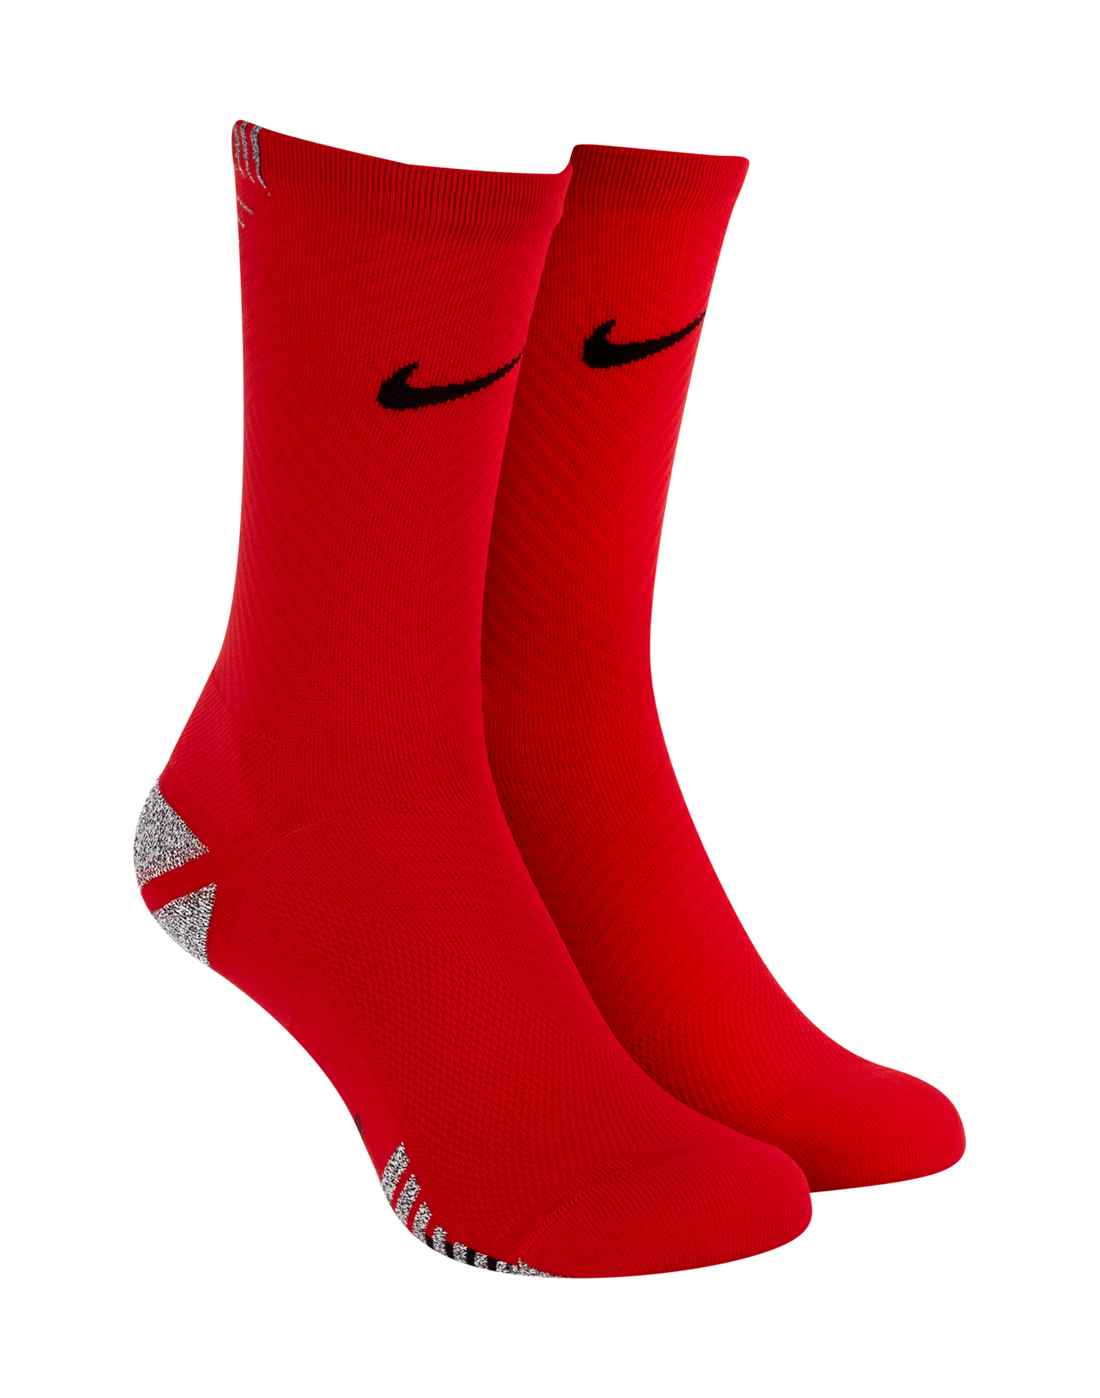 Nike Adult Nike Grip Crew Sock | Red | Life Style Sports